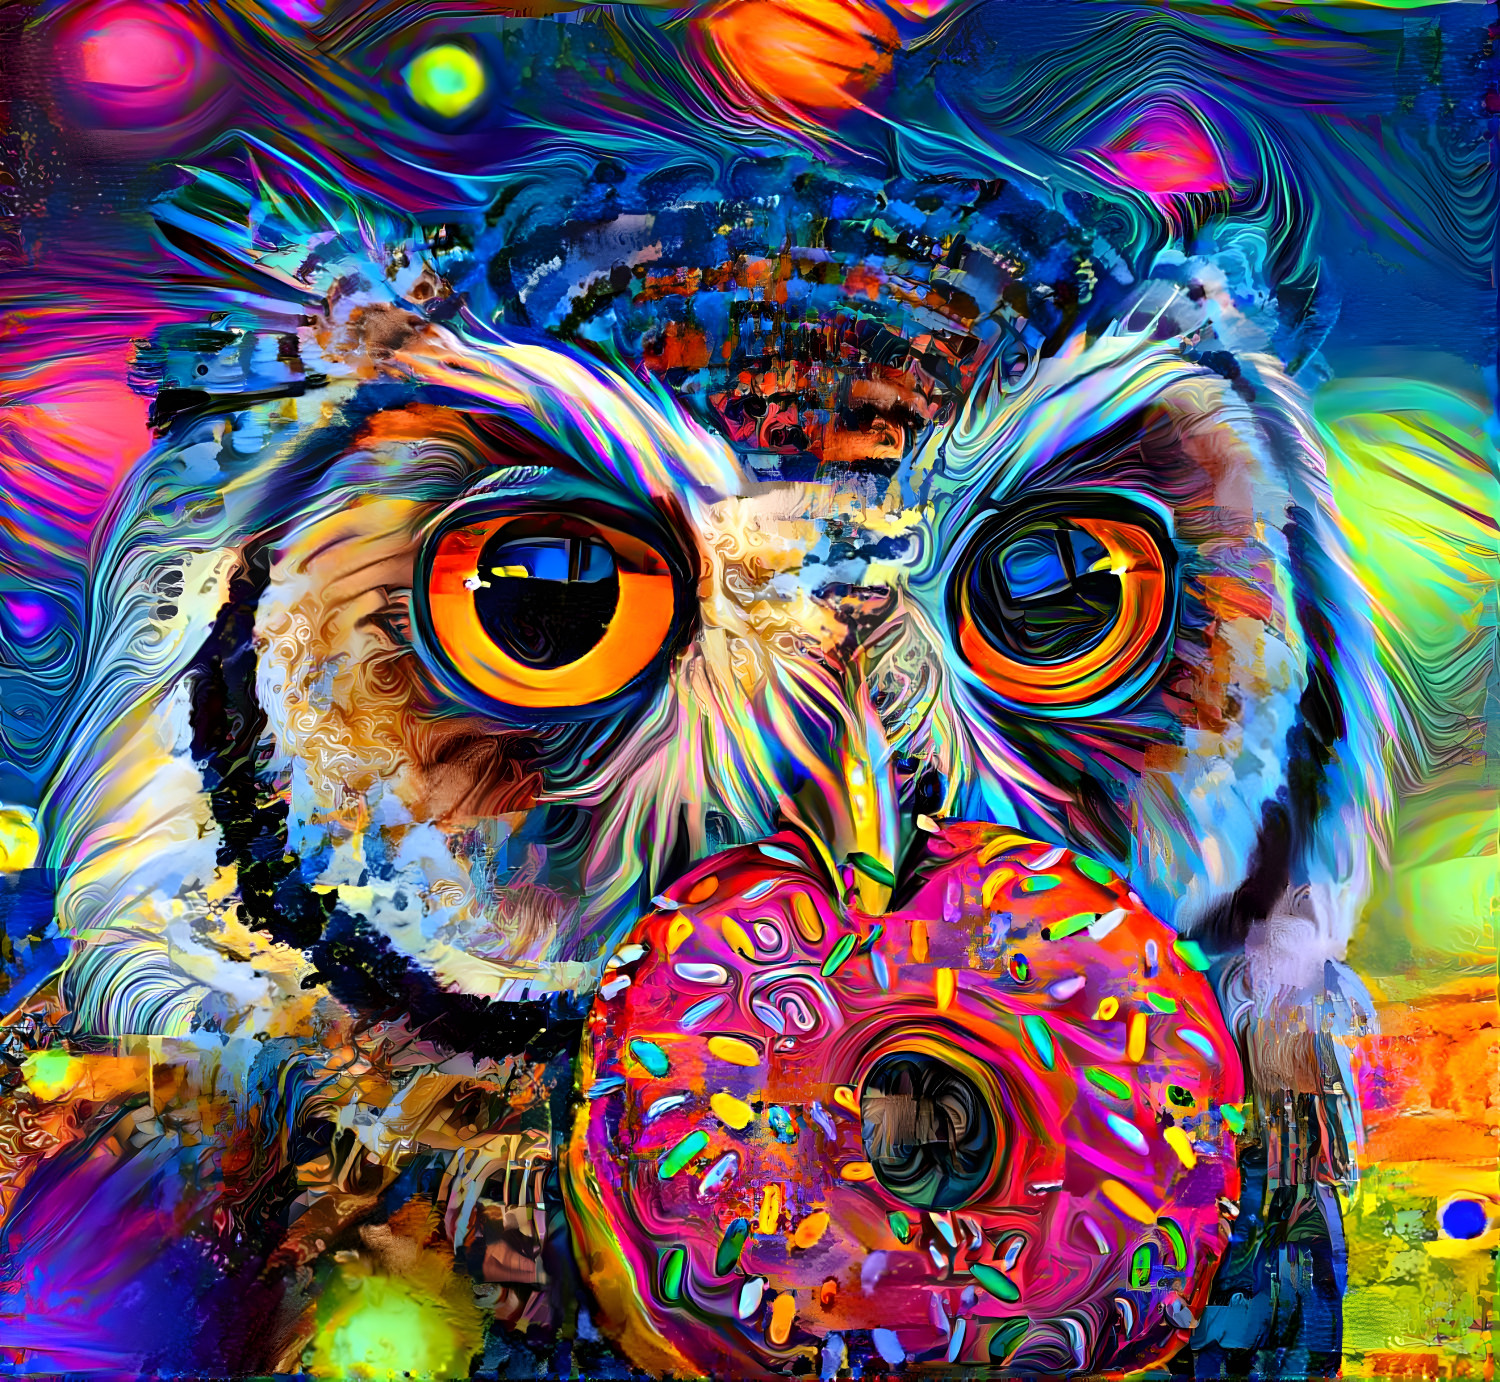 Owls & Donuts…Why Not?